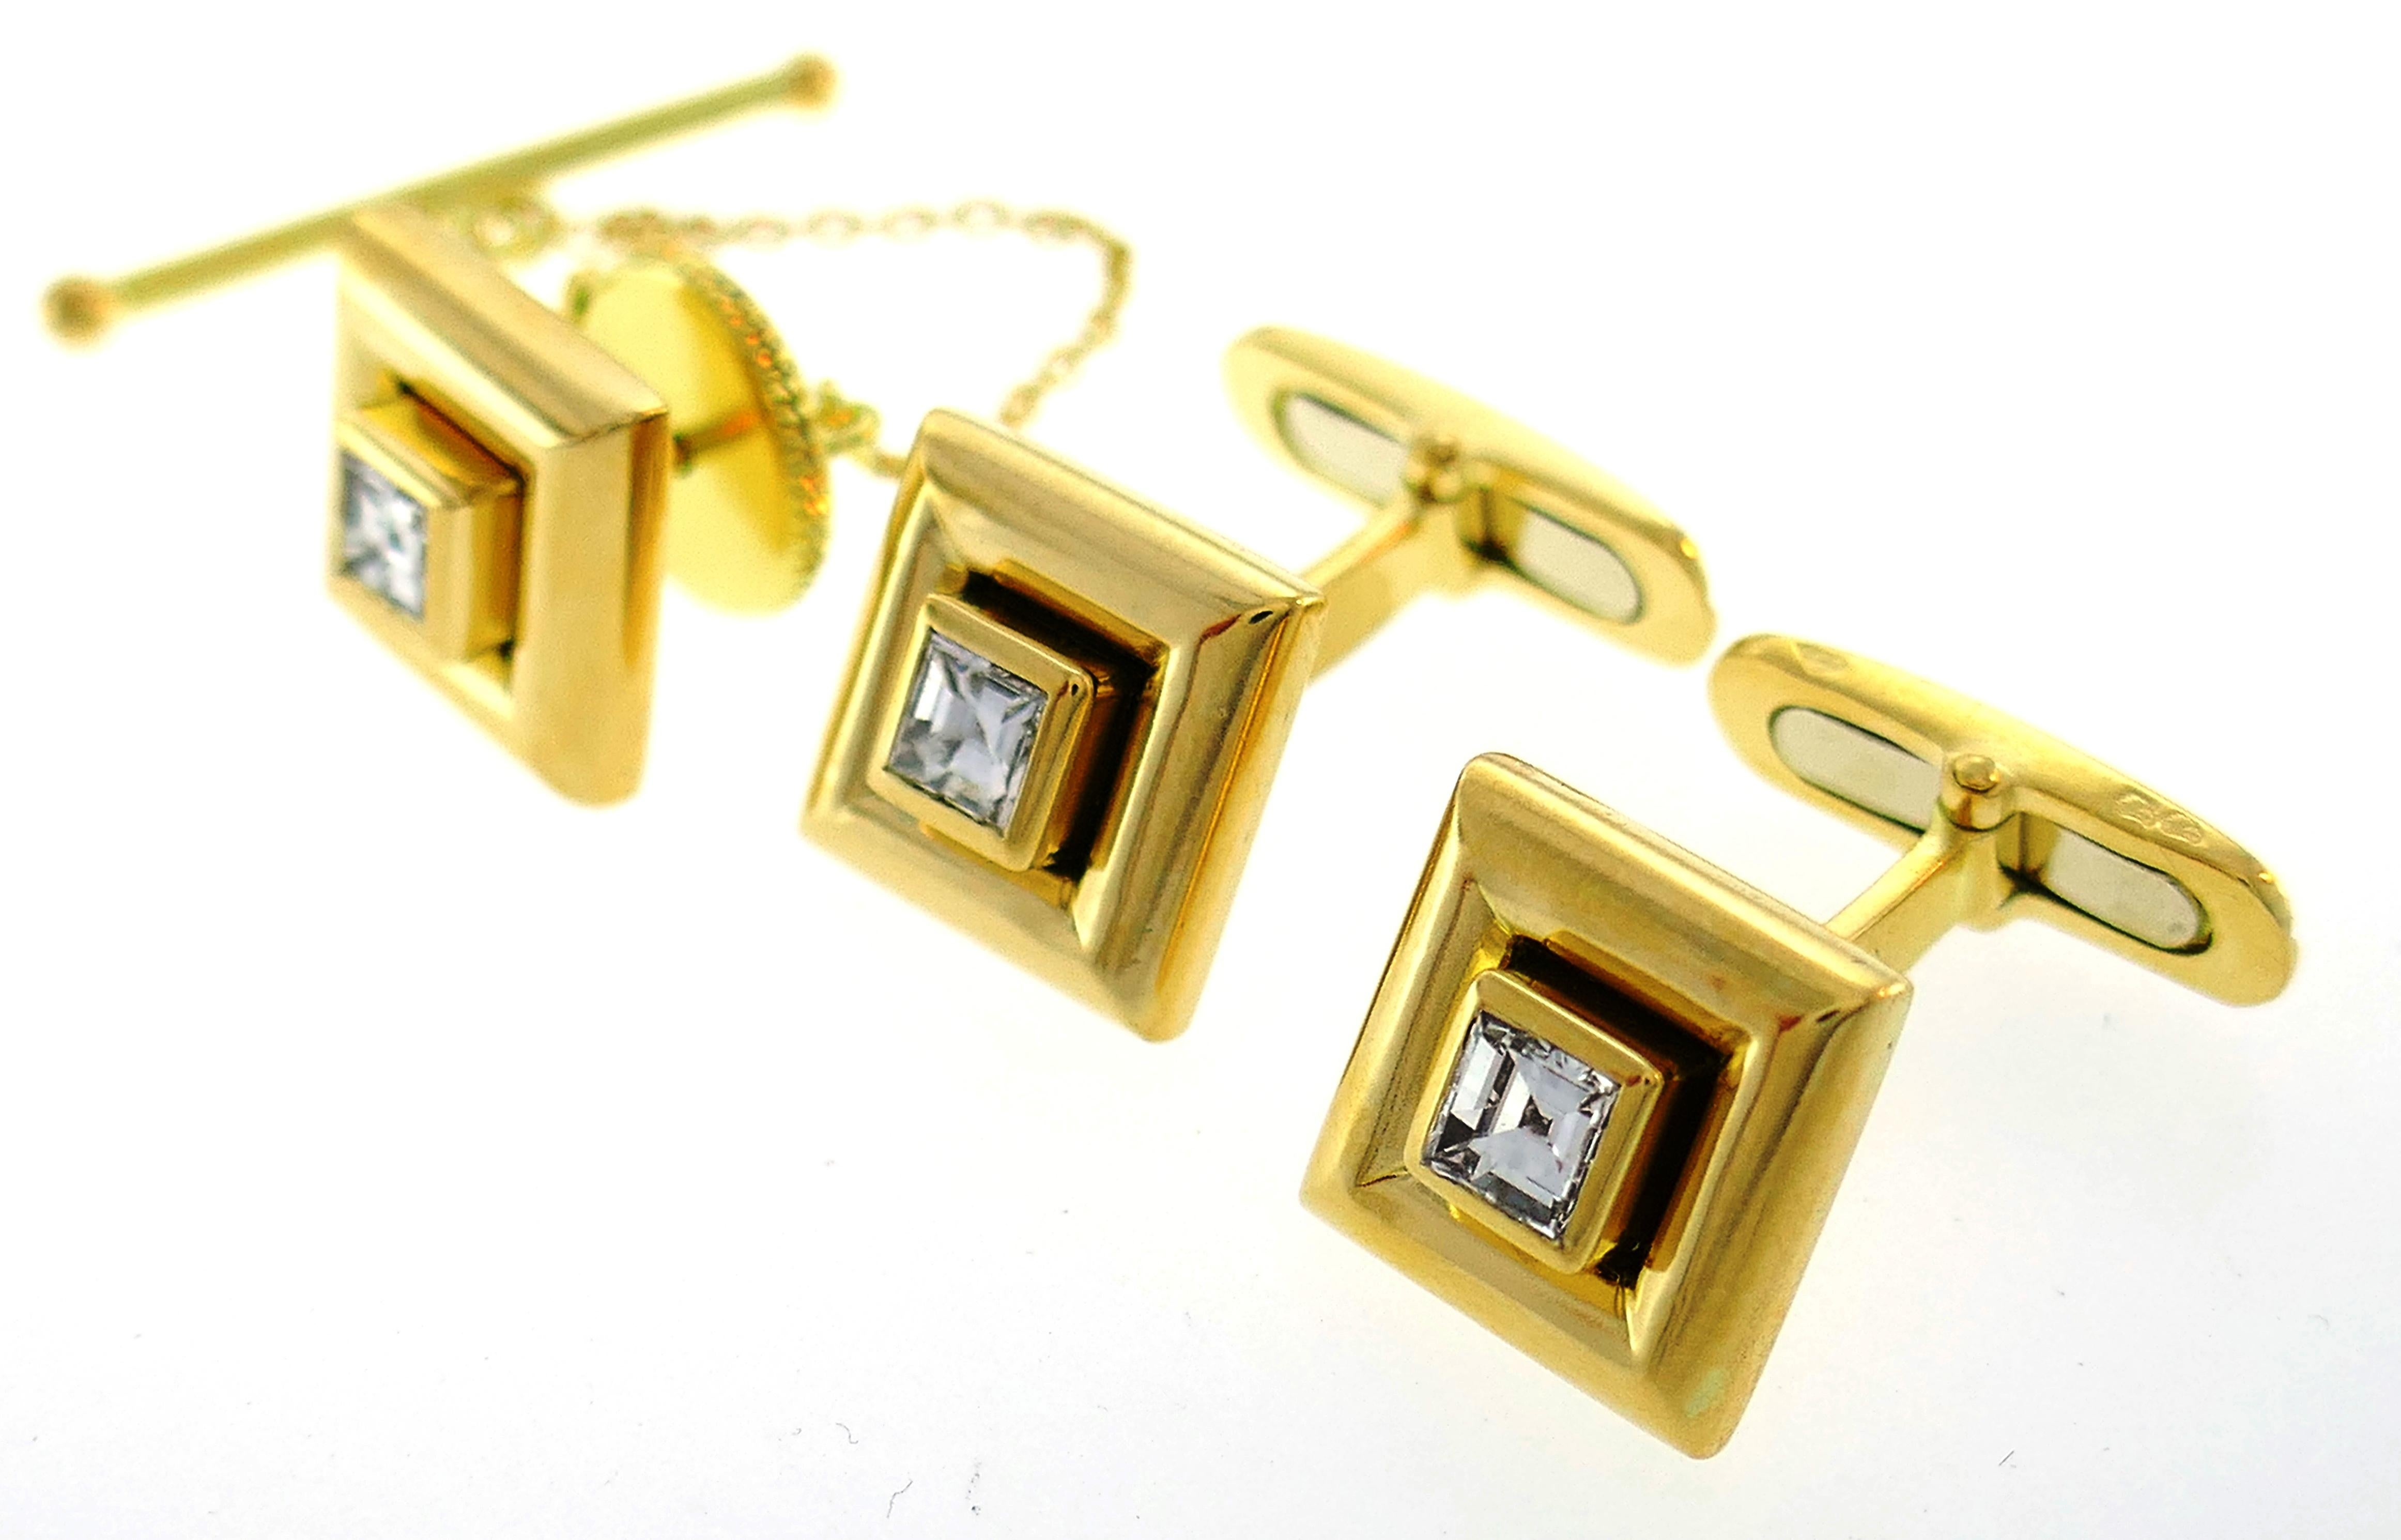 Classy cufflink & stud set created by Chaumet in France in the 1980s. The set consists of a pair of cufflinks and a stud. Elegant and chic, the set is a great addition to your jewelry and accessories collection. 
Made of 18 karat (stamped) yellow